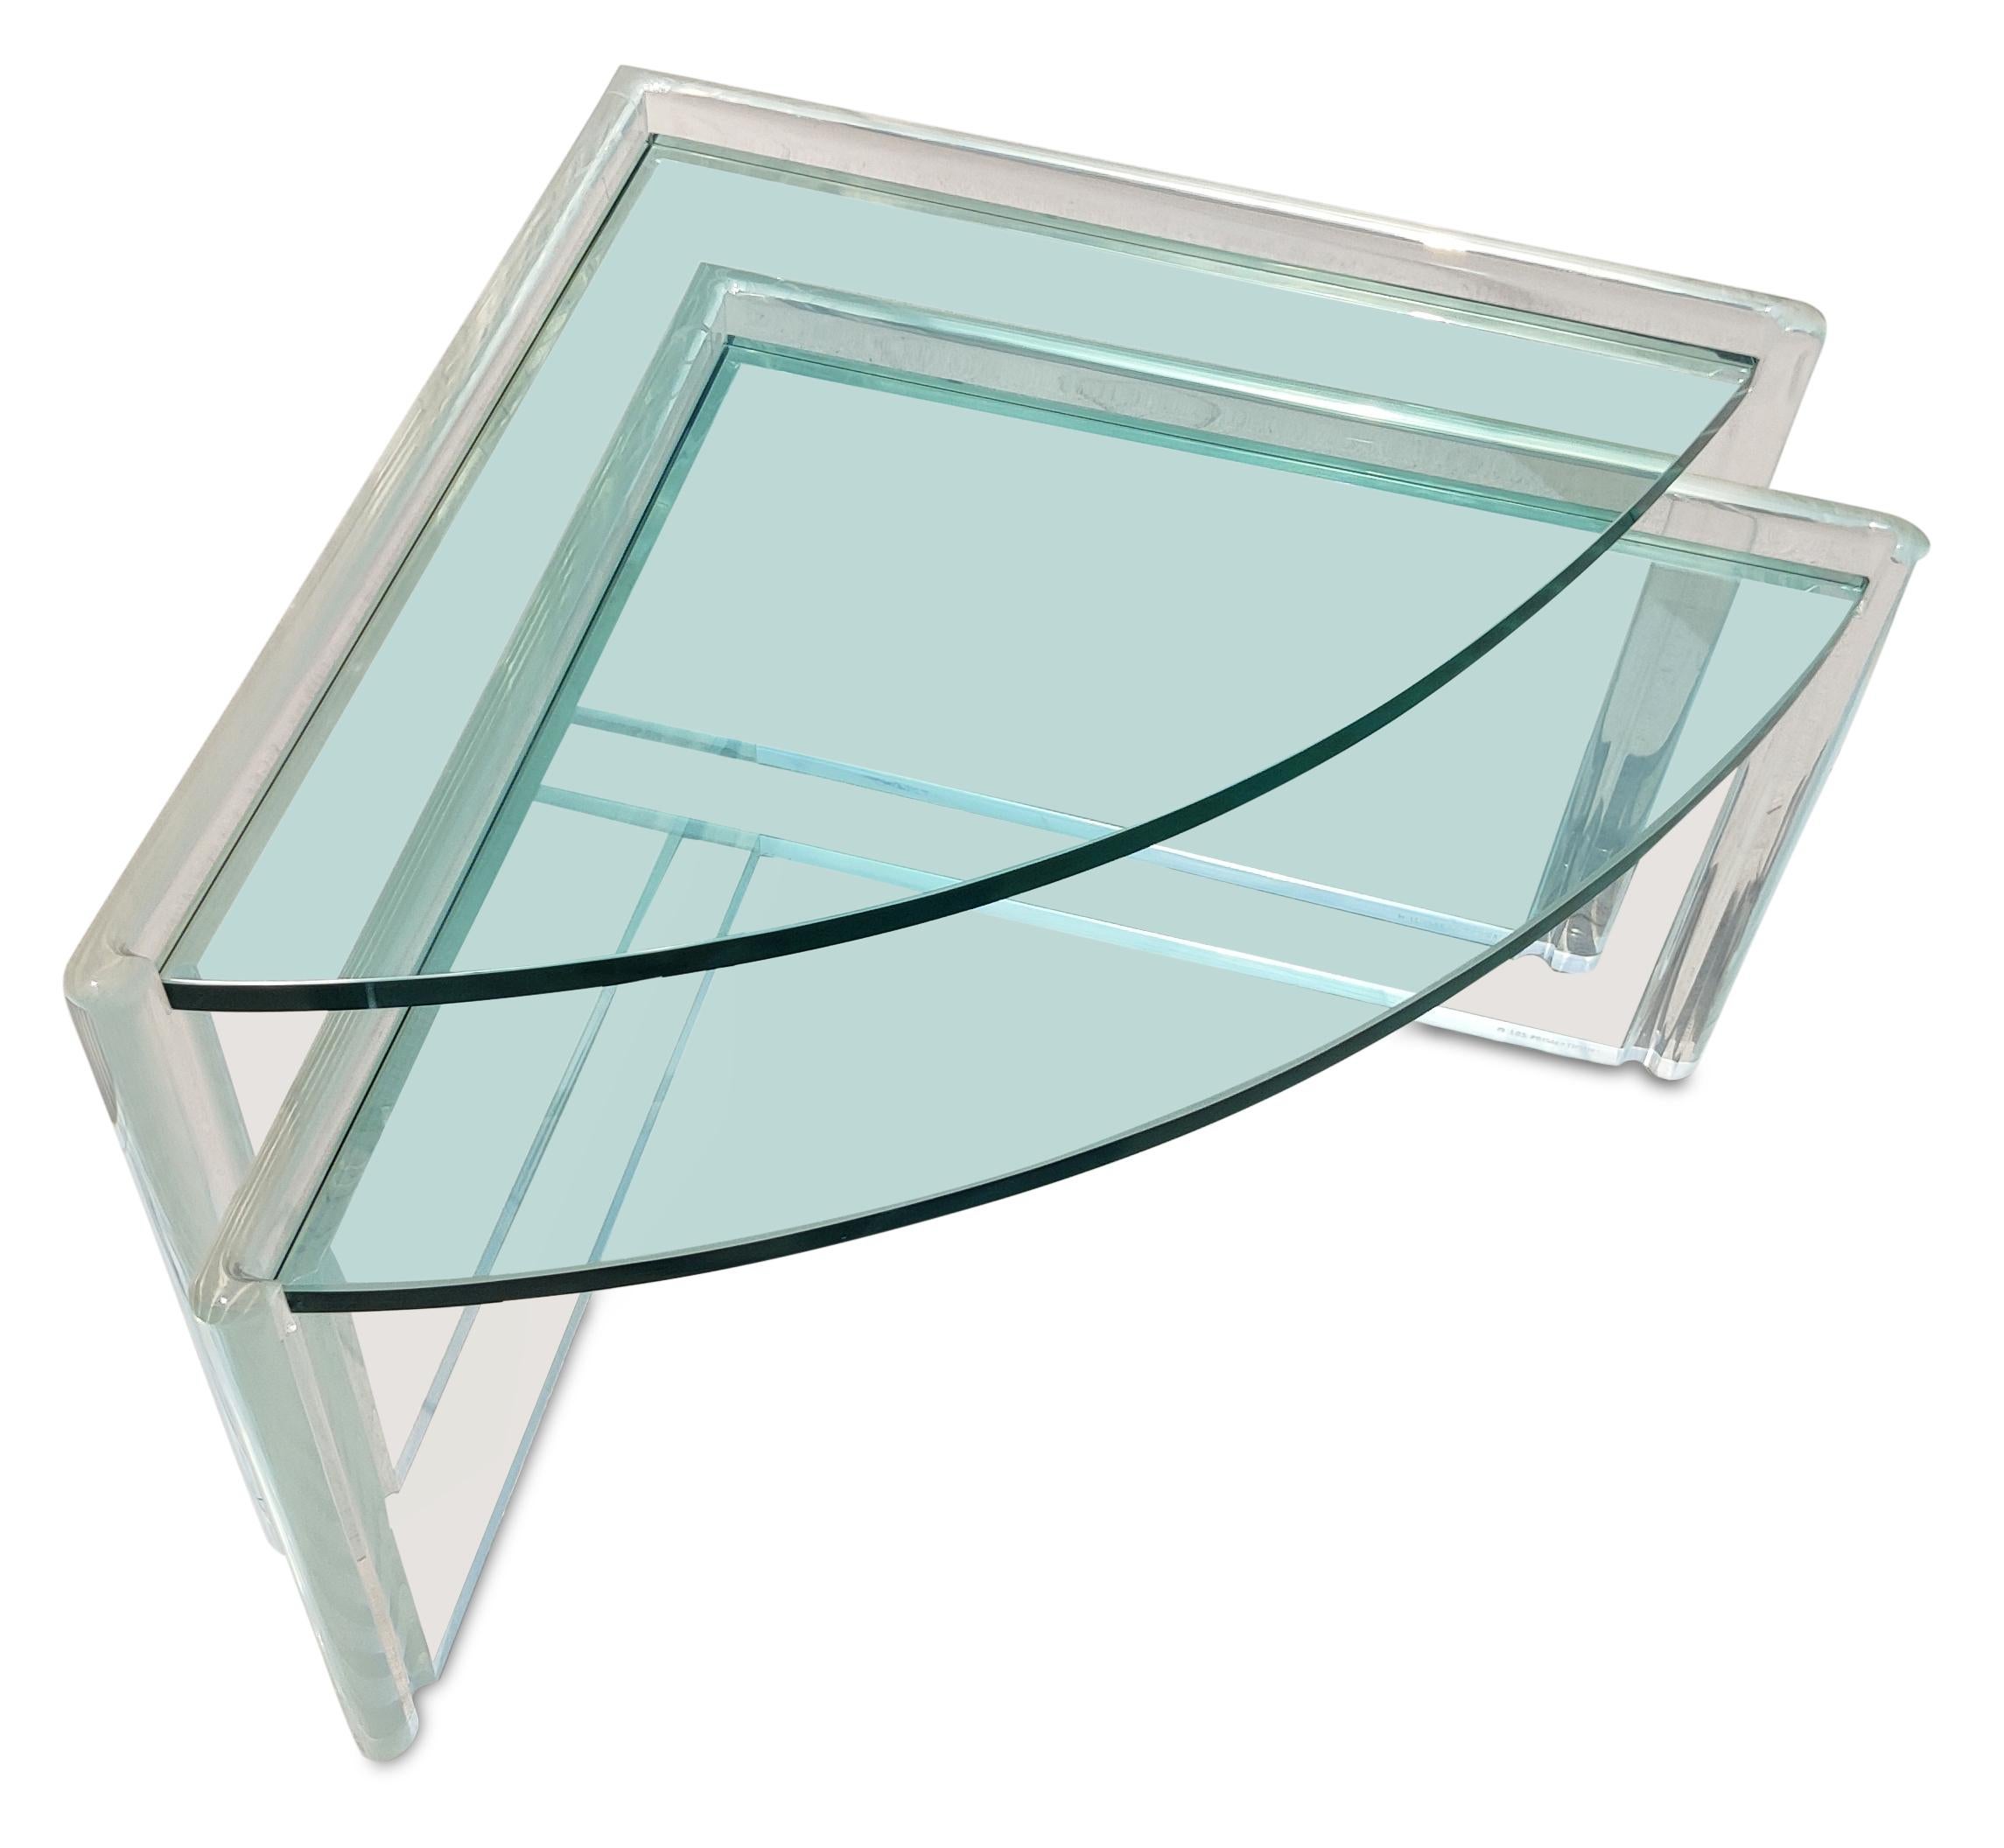 These stunning lucite and glass tables were made in the 1990s by manufacturer Les Prismatiques. Shaped like rounded triangles, each table is made of 1.5 inch thick lucite and 3/4 inch thick glass. Very dense and solid construction make these very